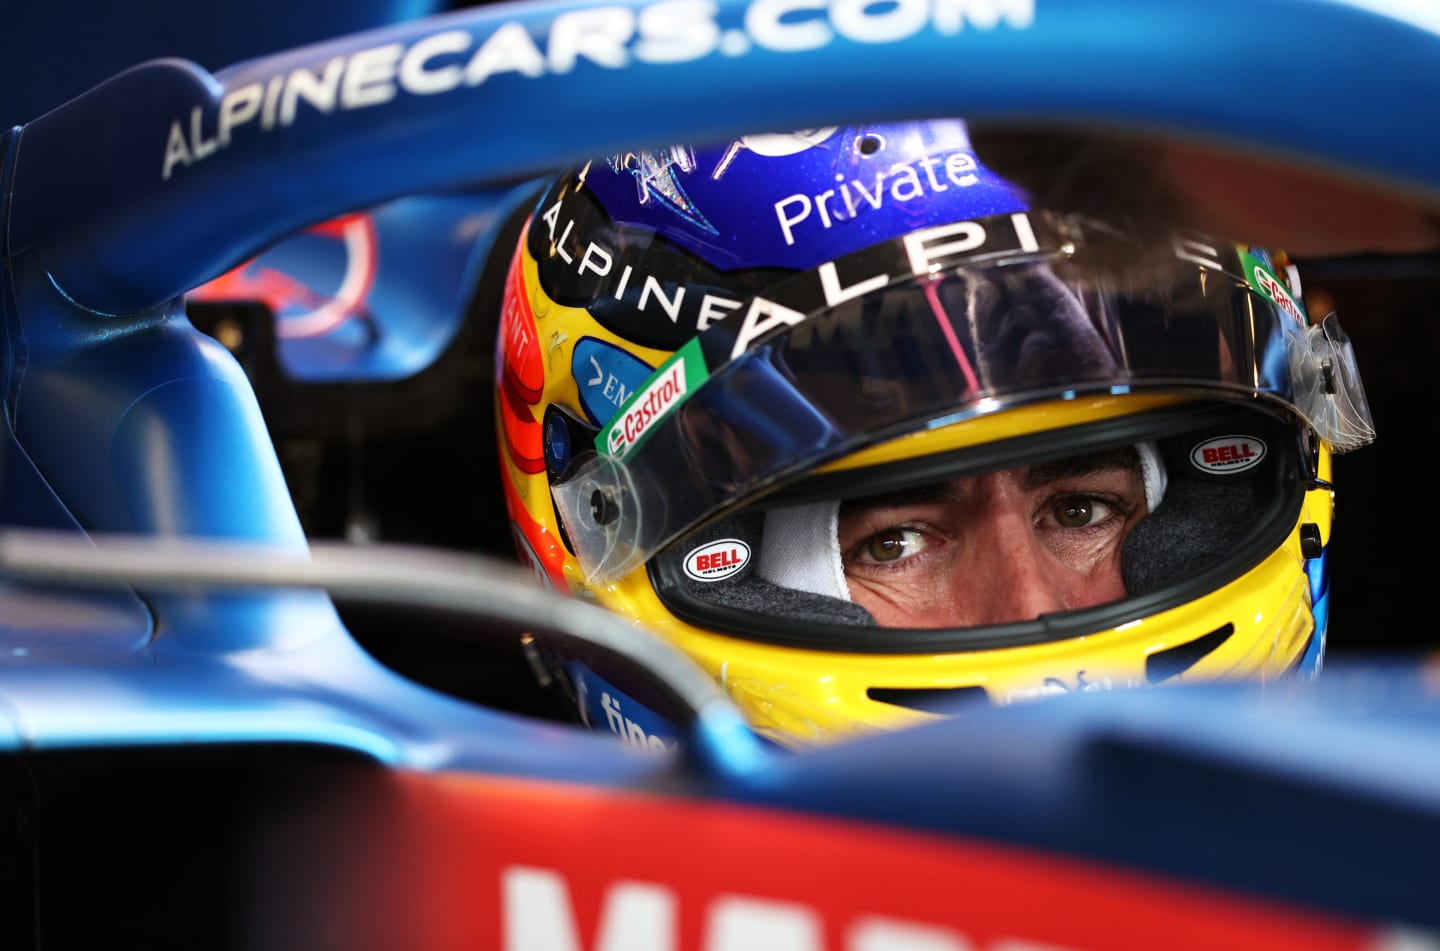 AUSTIN, TEXAS - OCTOBER 23: Fernando Alonso of Spain and Alpine F1 Team prepares to drive in the garage during final practice ahead of the F1 Grand Prix of USA at Circuit of The Americas on October 23, 2021 in Austin, Texas. (Photo by Chris Graythen/Getty Images)